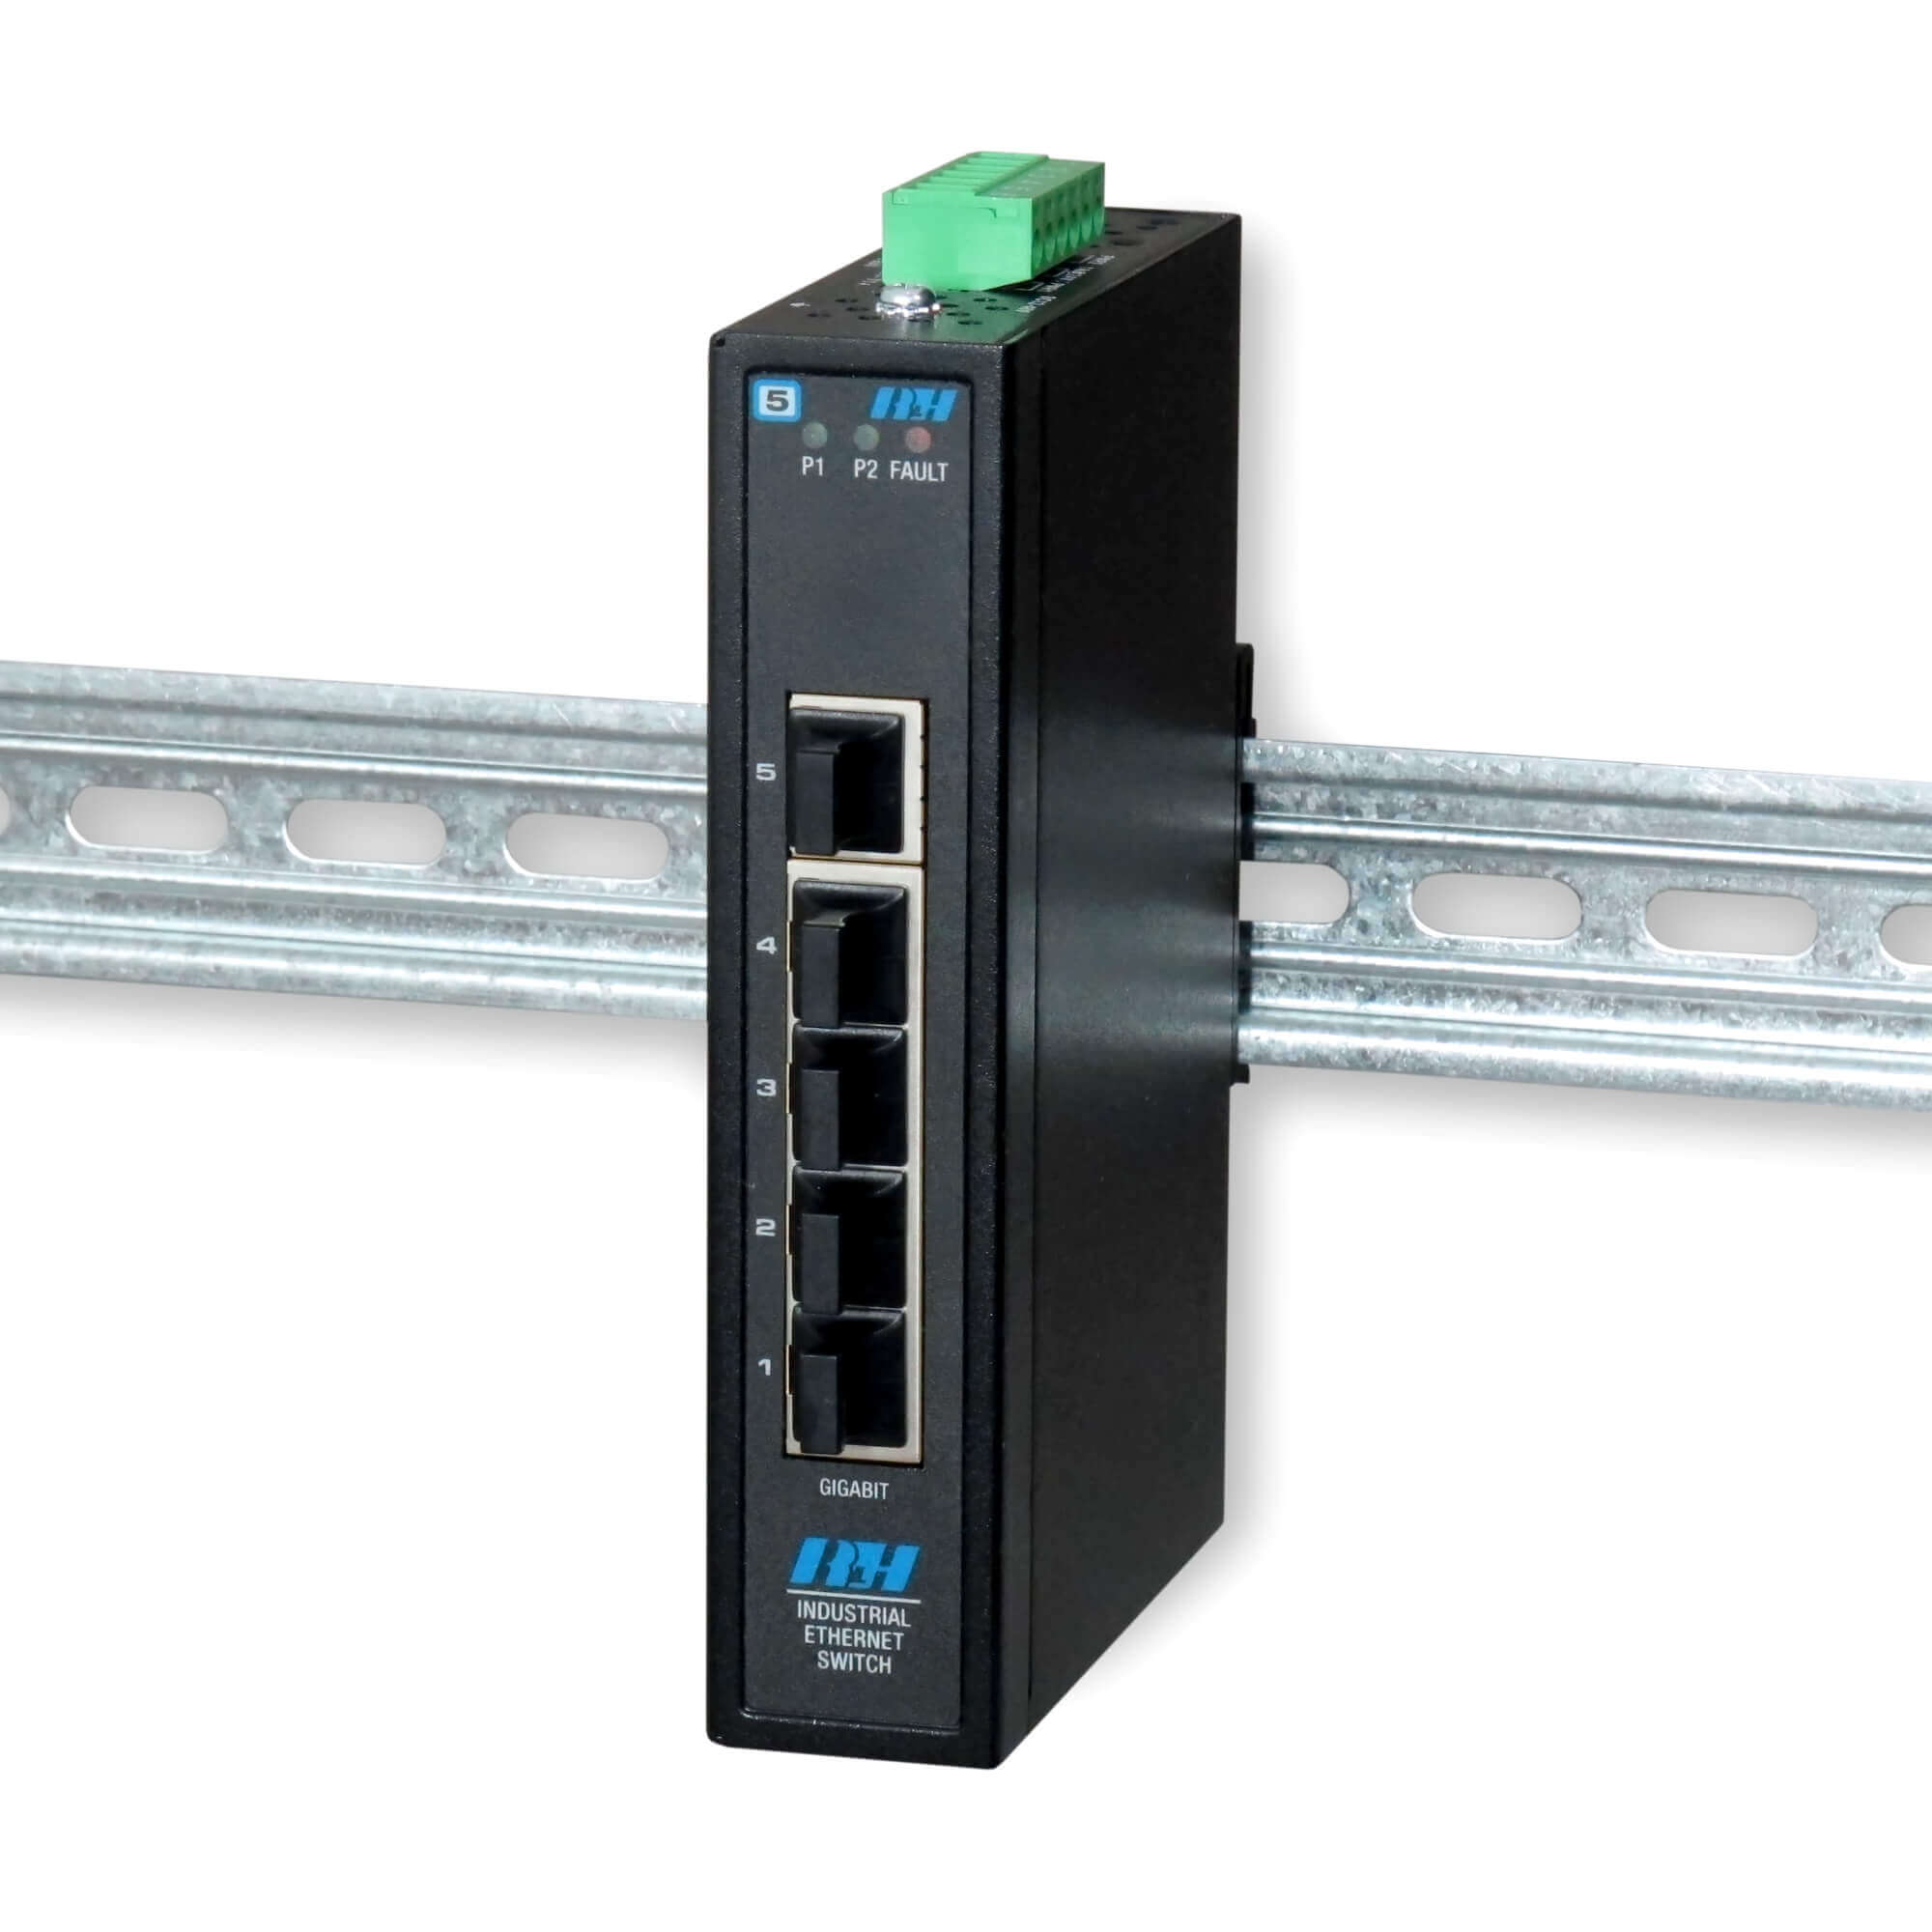 5 Port Industrial Gigabit Network Switch - Ethernet Switches, Networking  IO Products